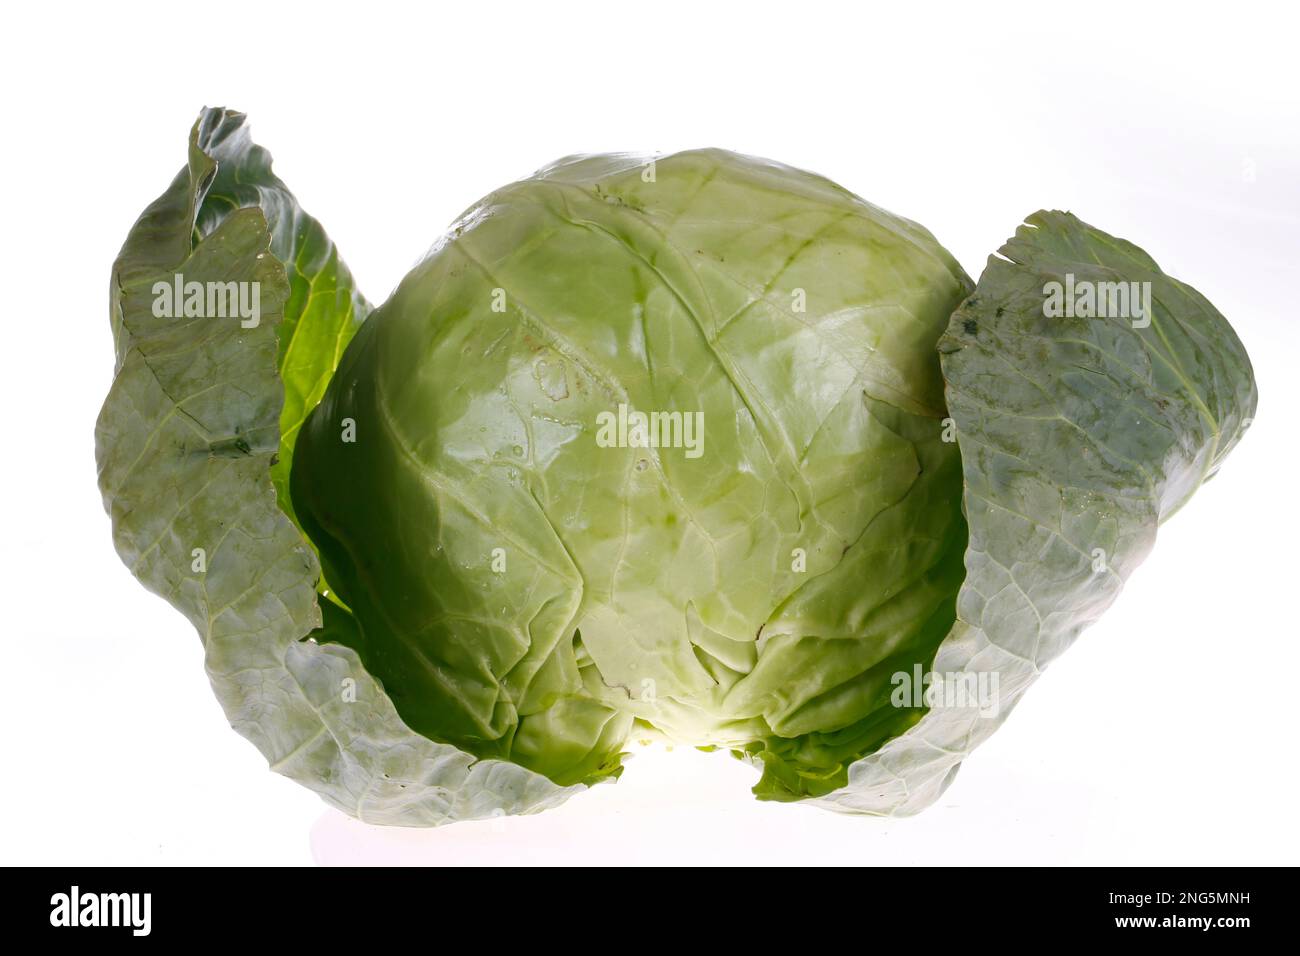 Cabbage patch on the white background, close-up pictures Stock Photo